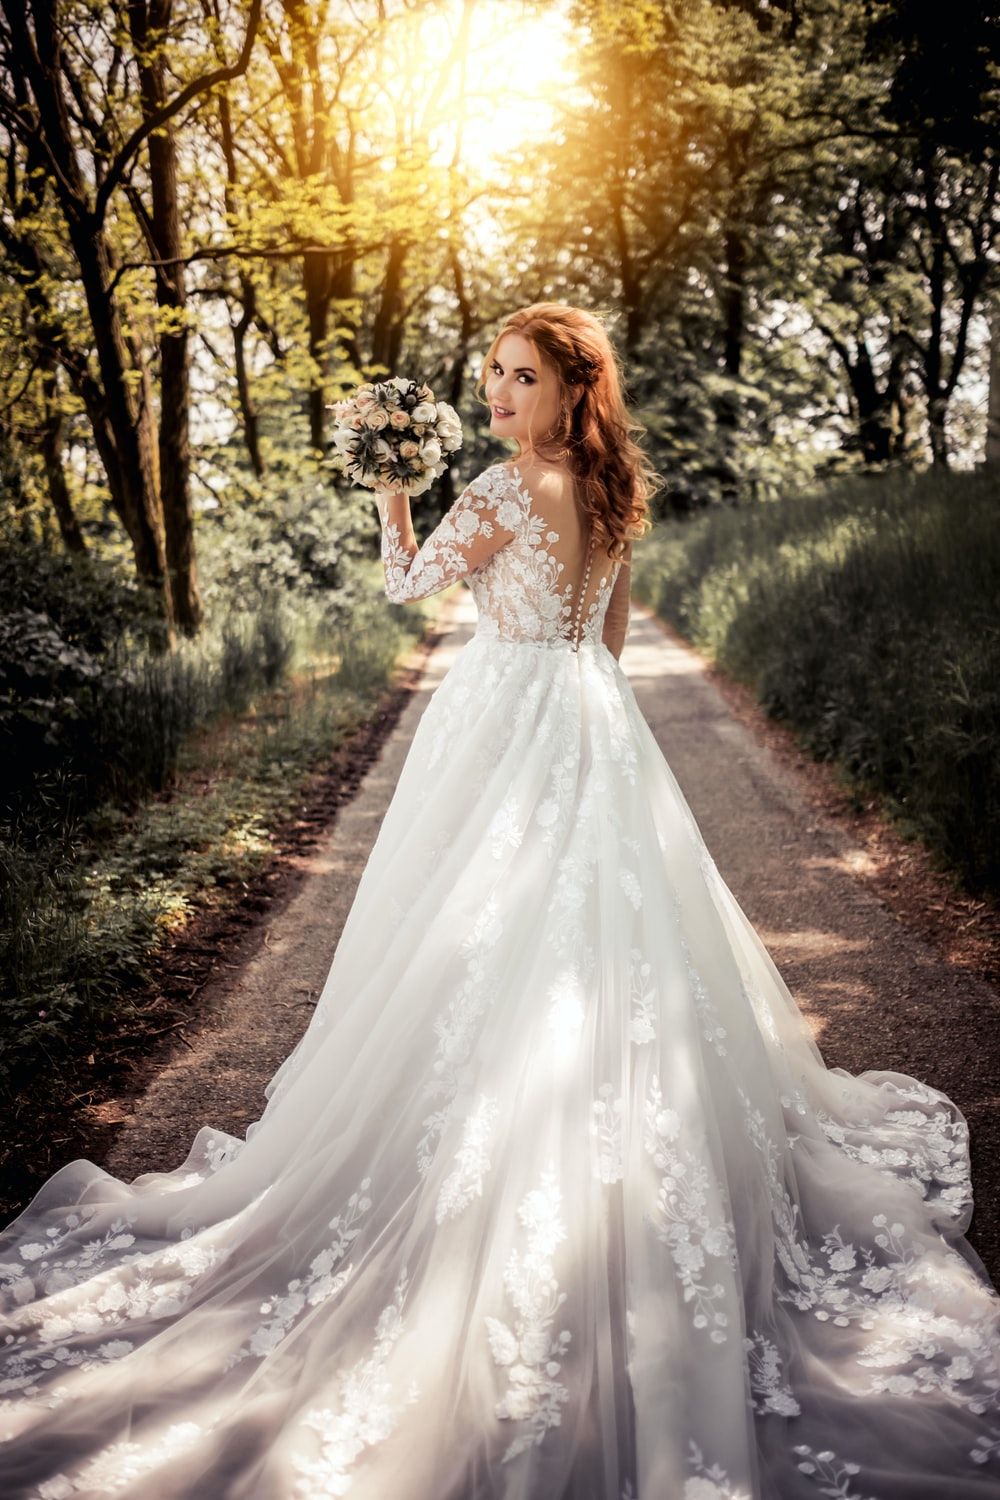 Bride Picture [HD]. Download Free Image